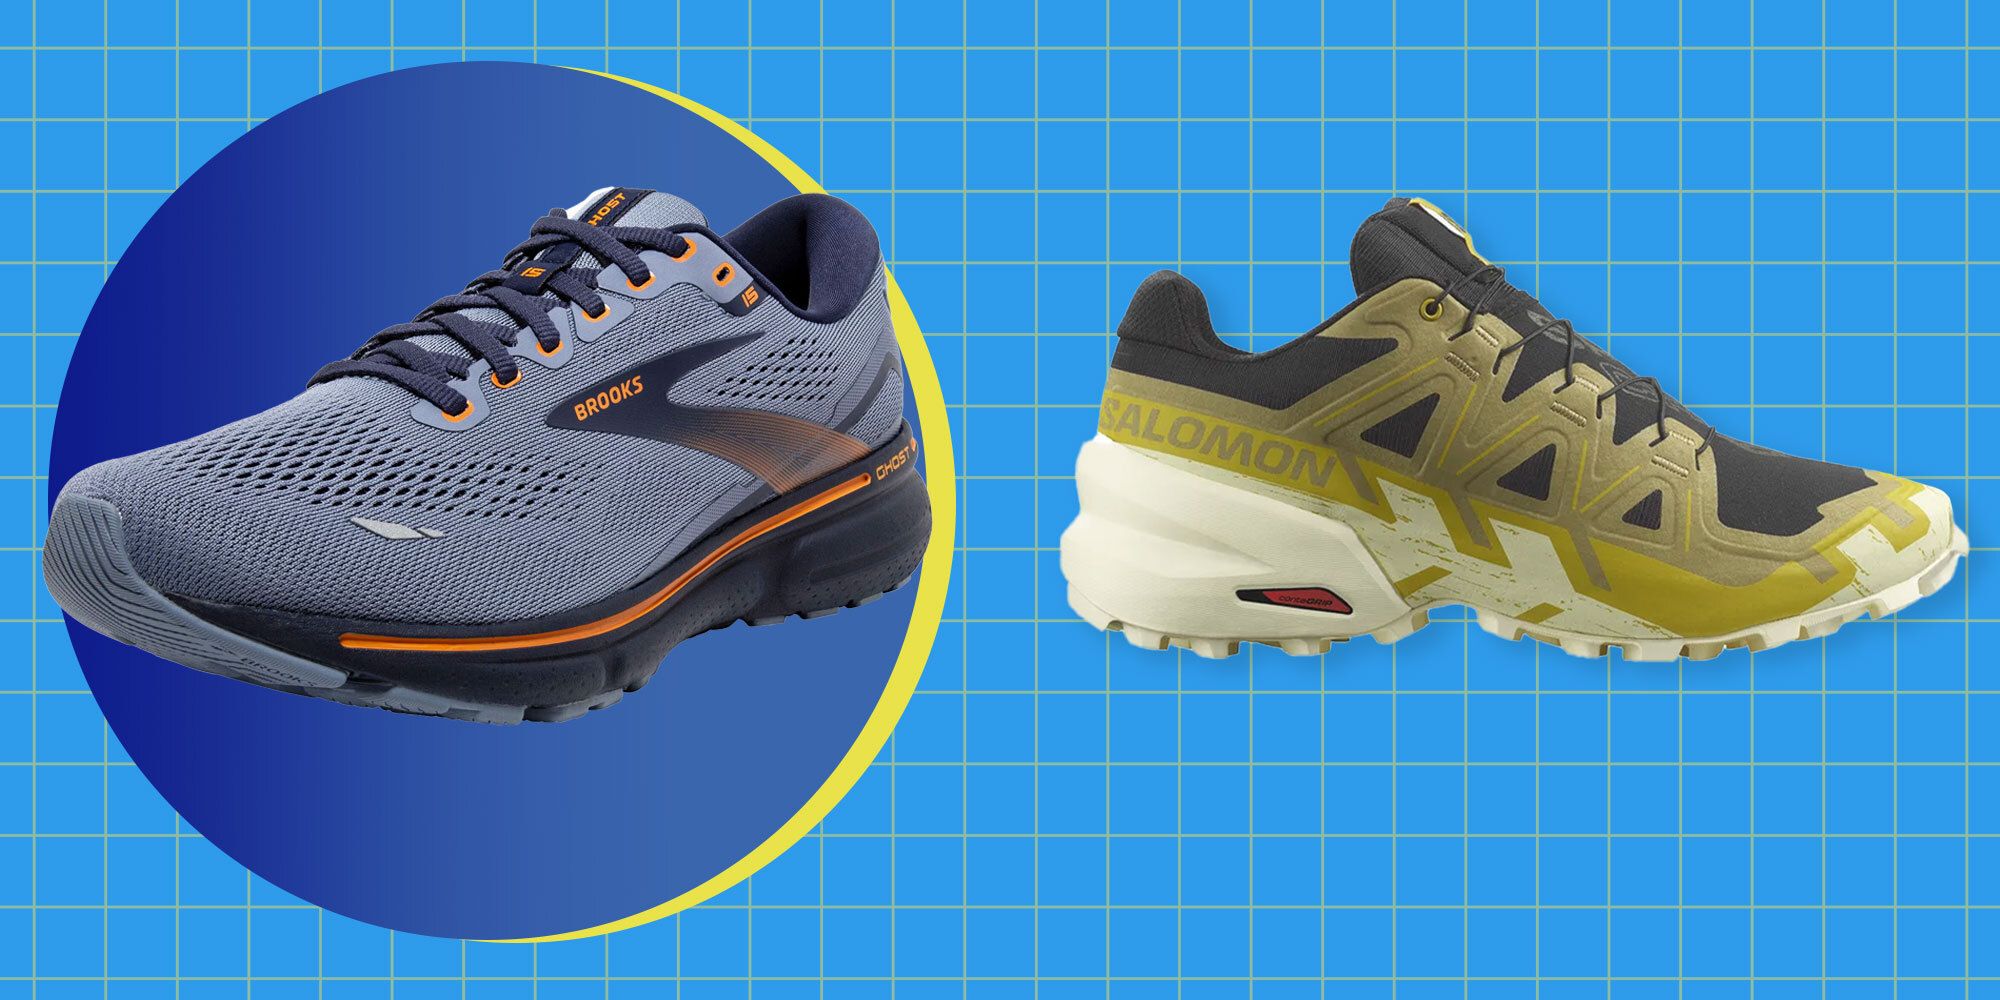 23 Best Arch Support Shoes for Long Days on Your Feet